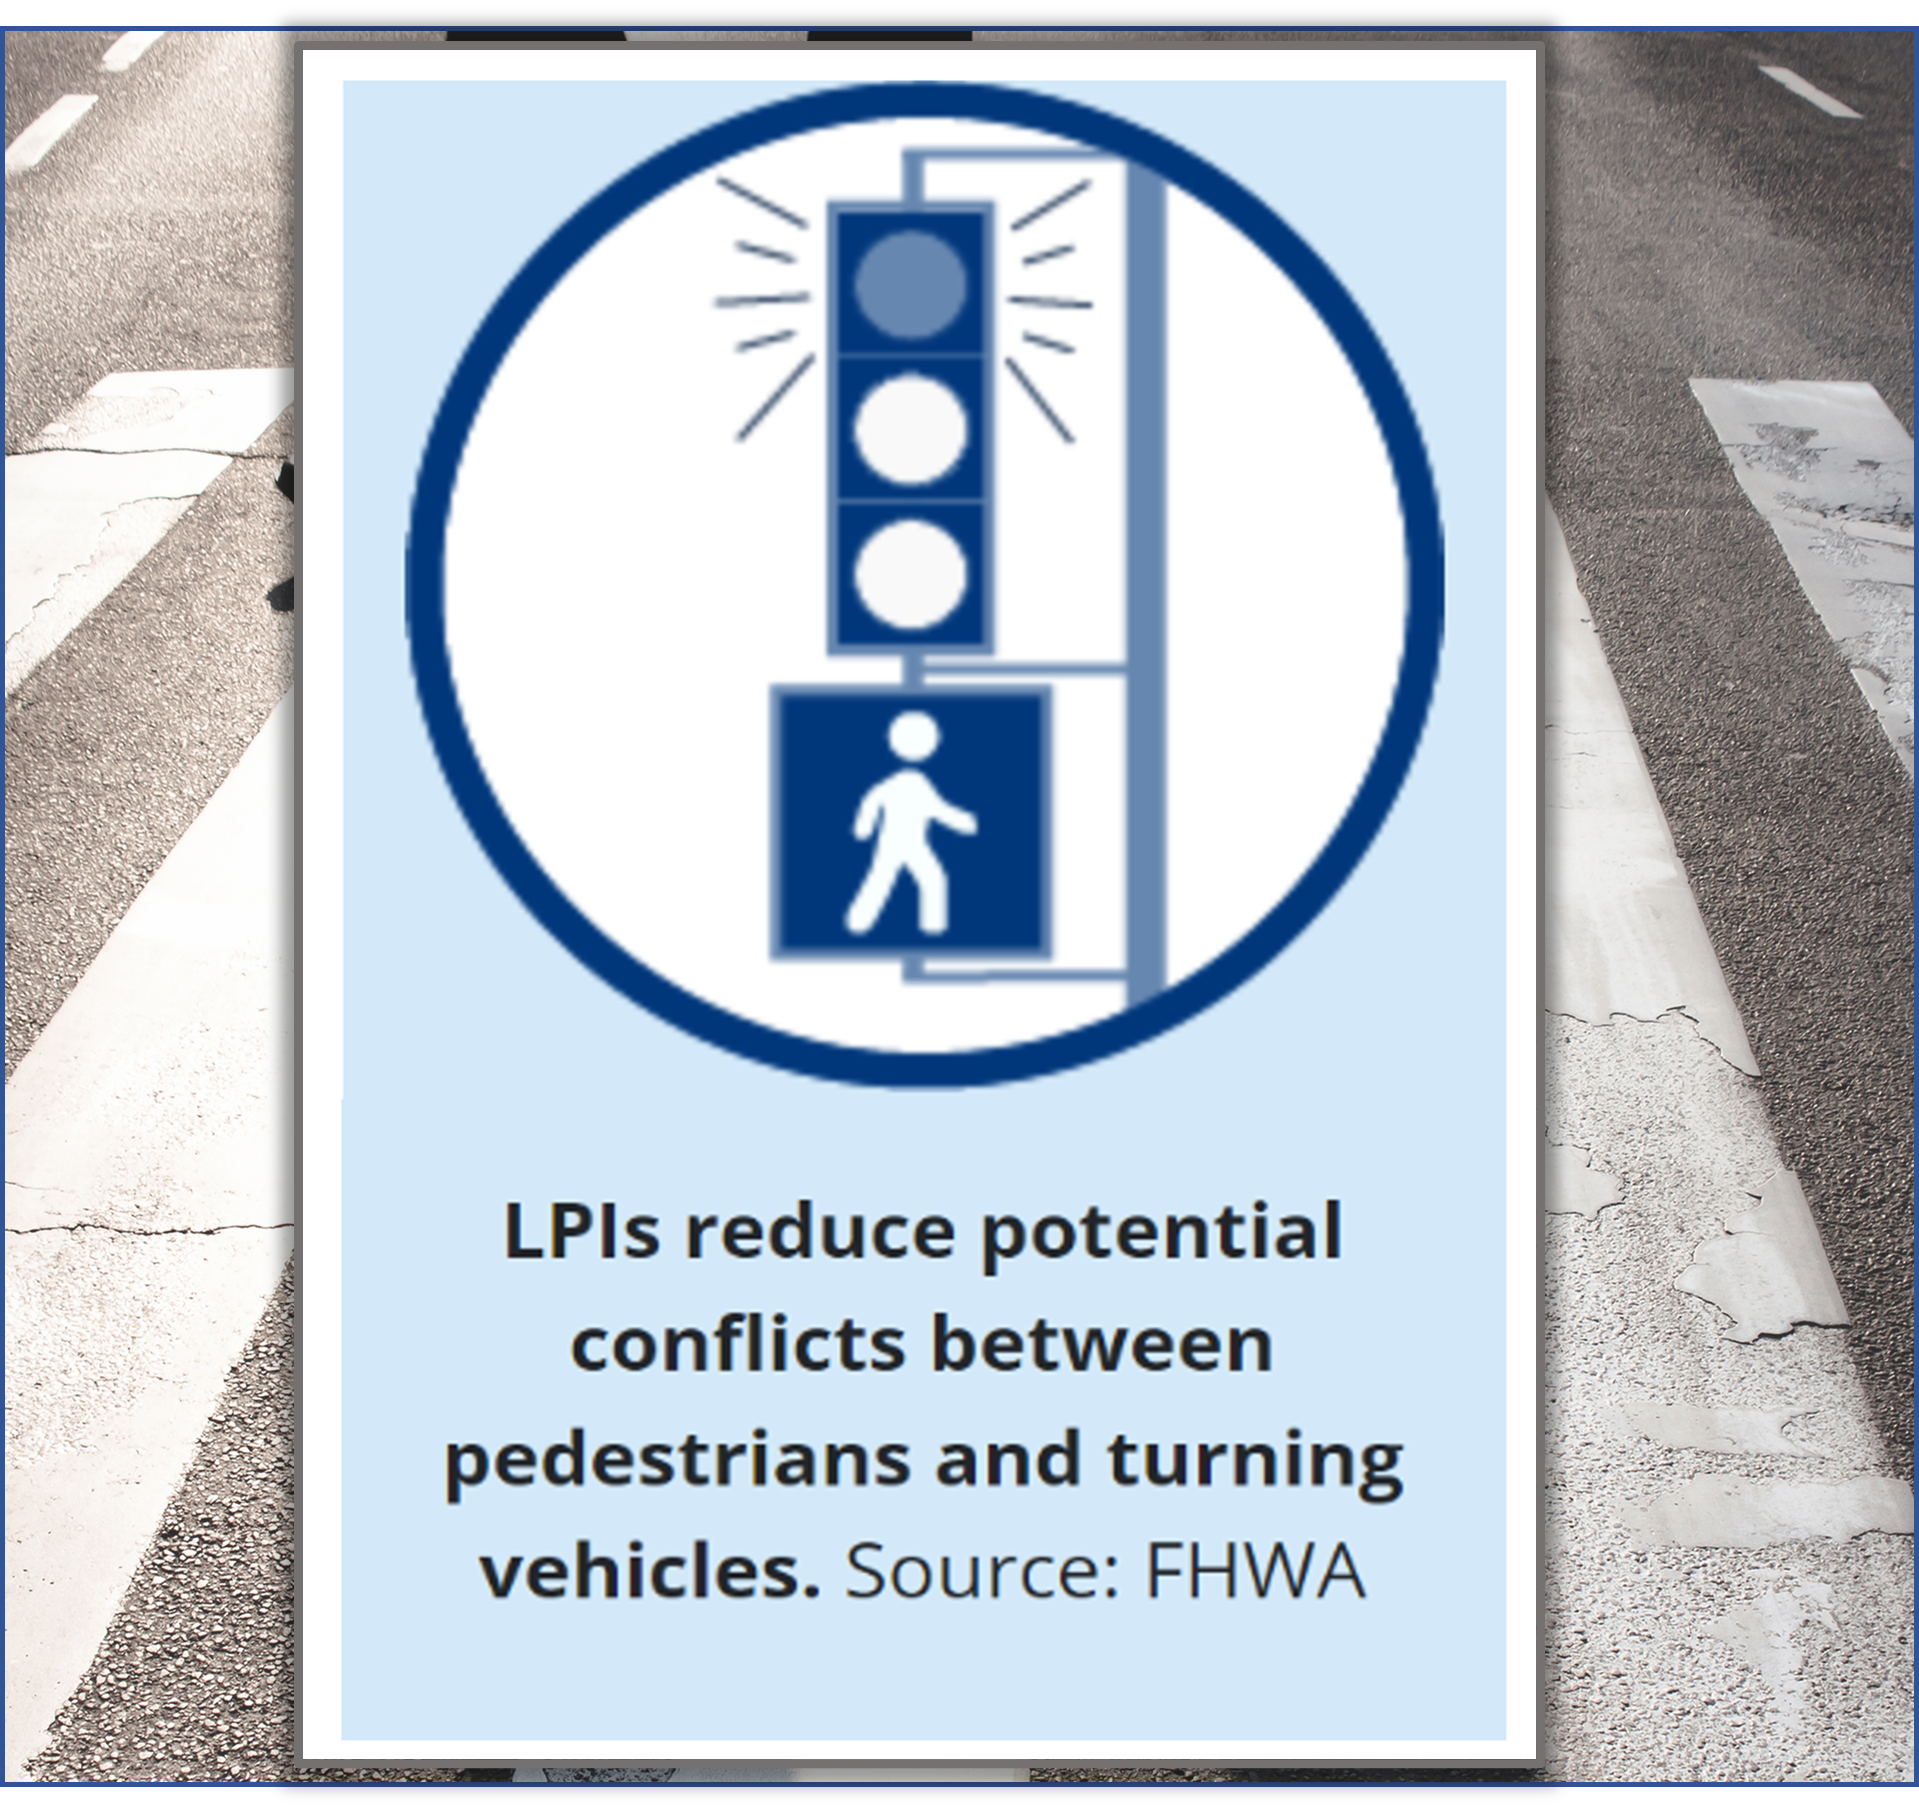 LPI benefits with added backgroung crosswalk image